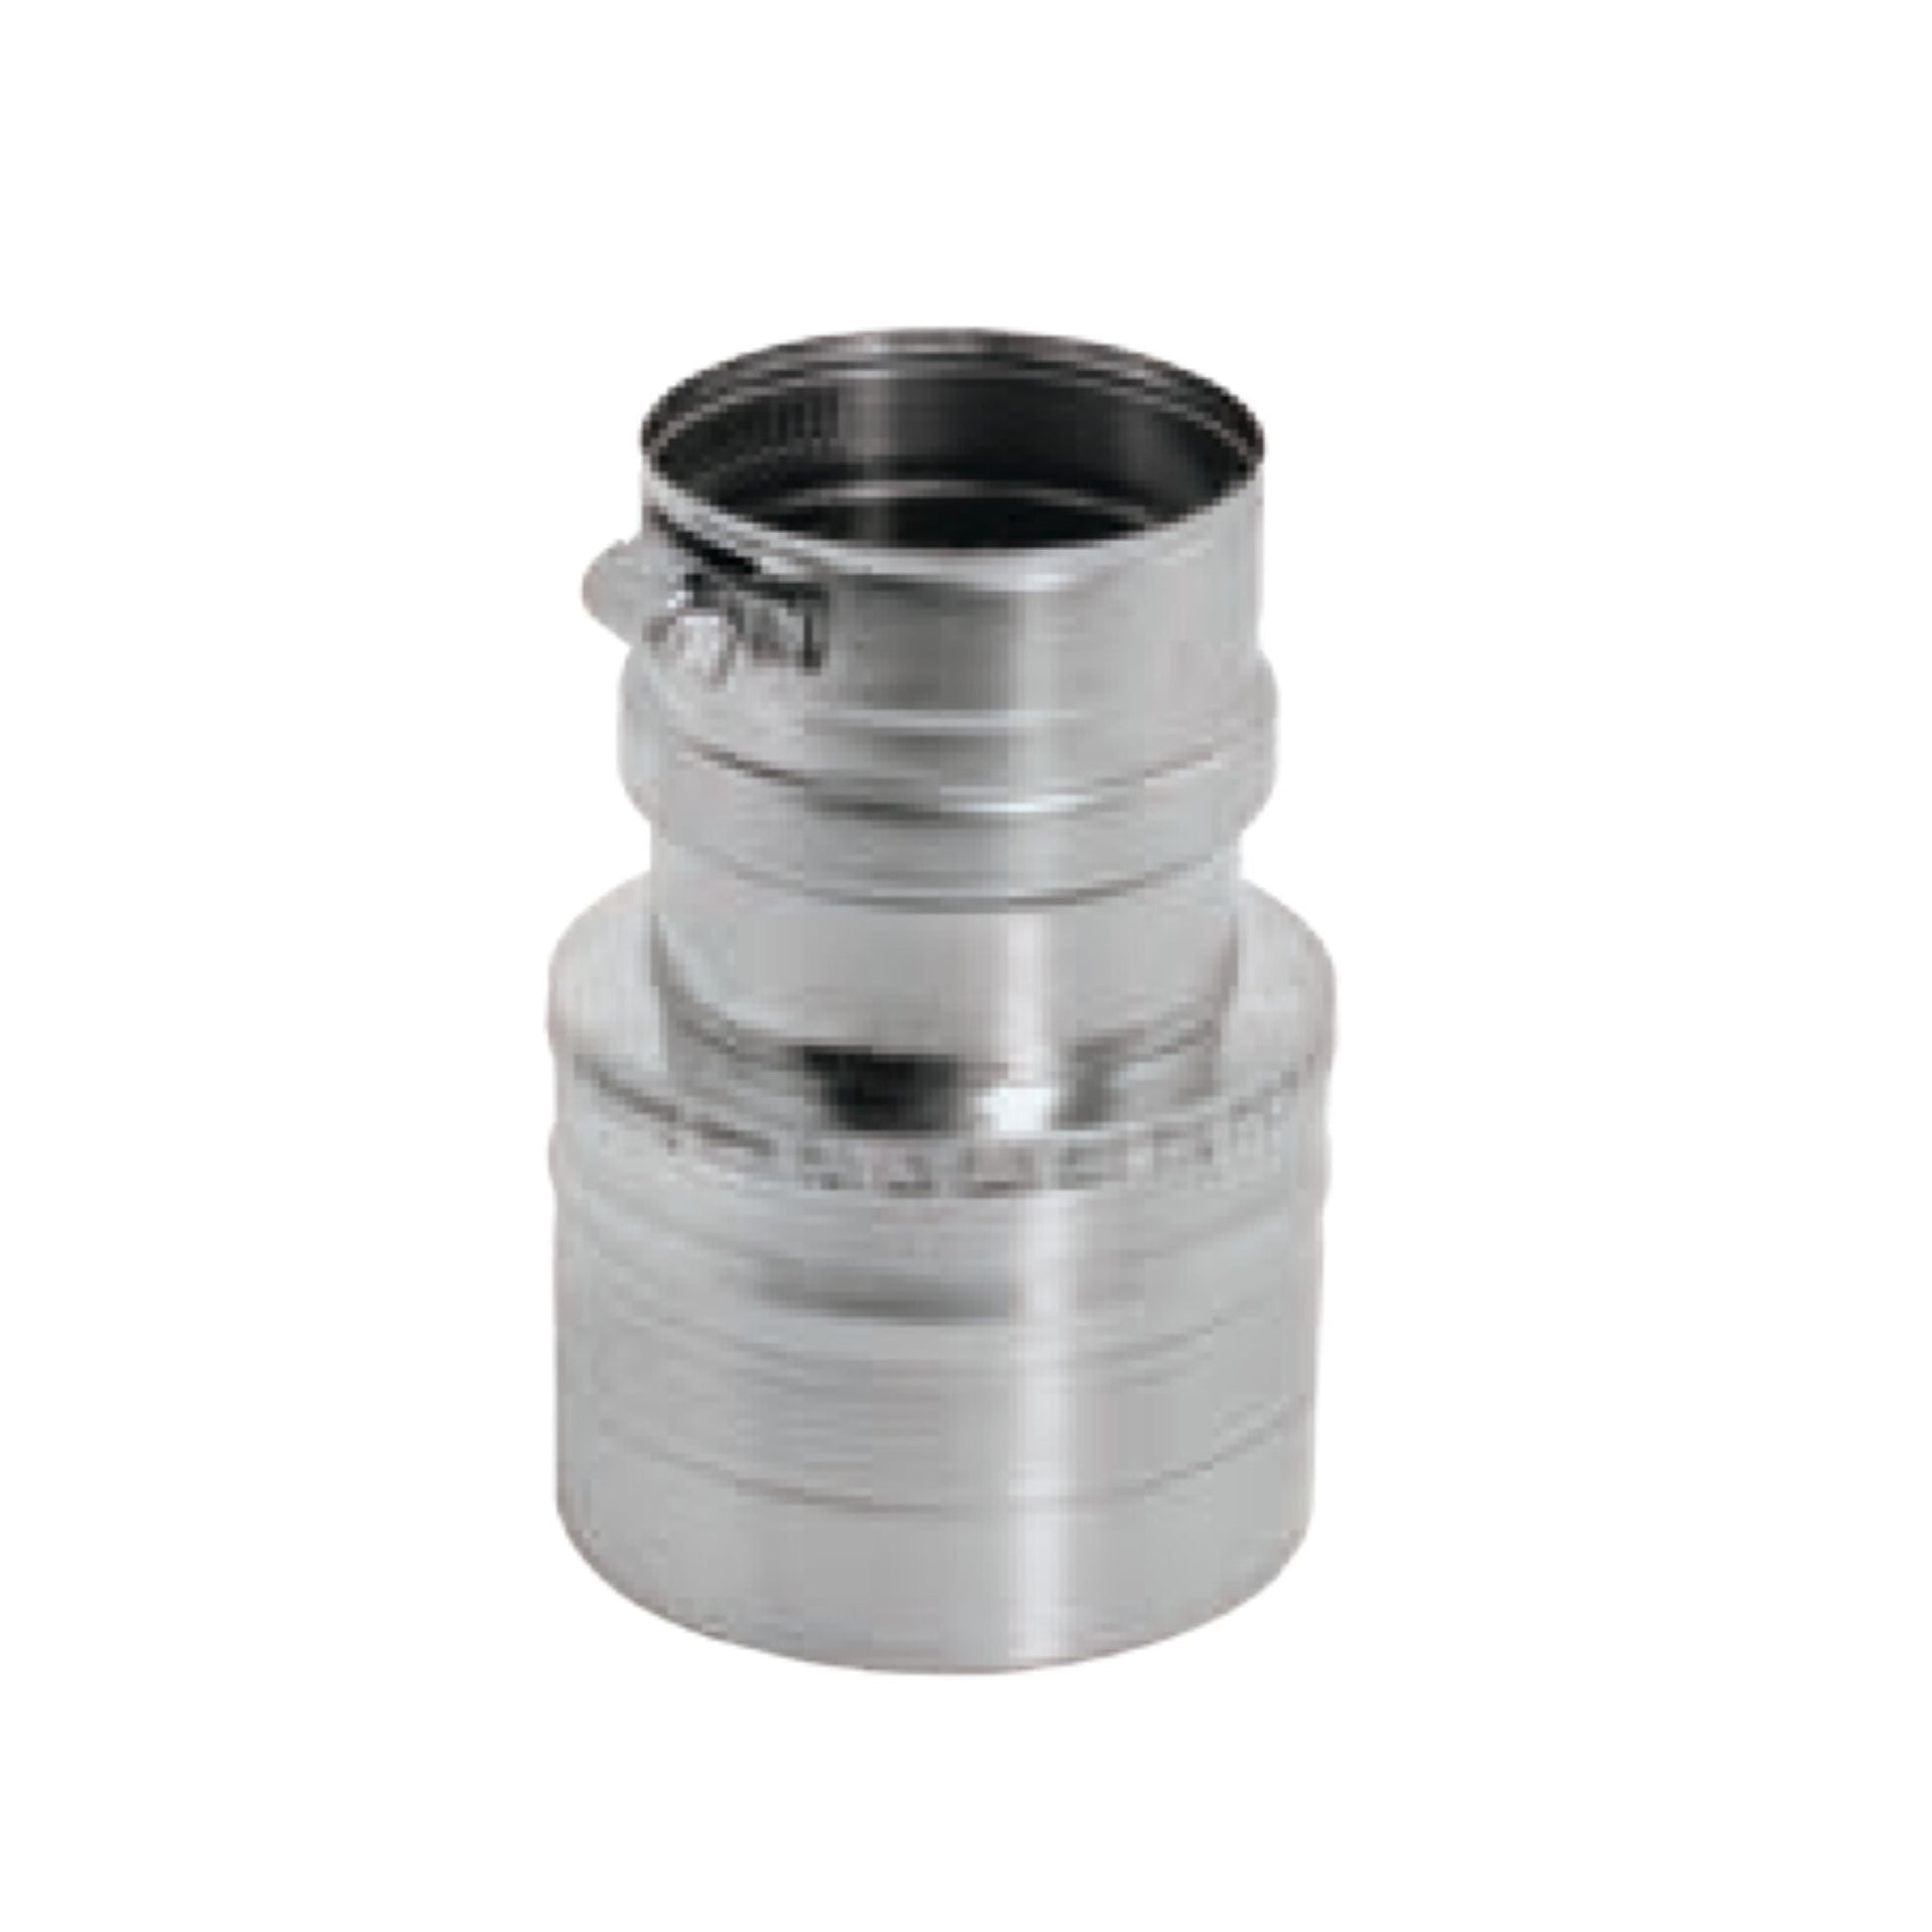 DuraVent FasNSeal 5" x 4" 29-4C Stainless Steel Stepped Reducer